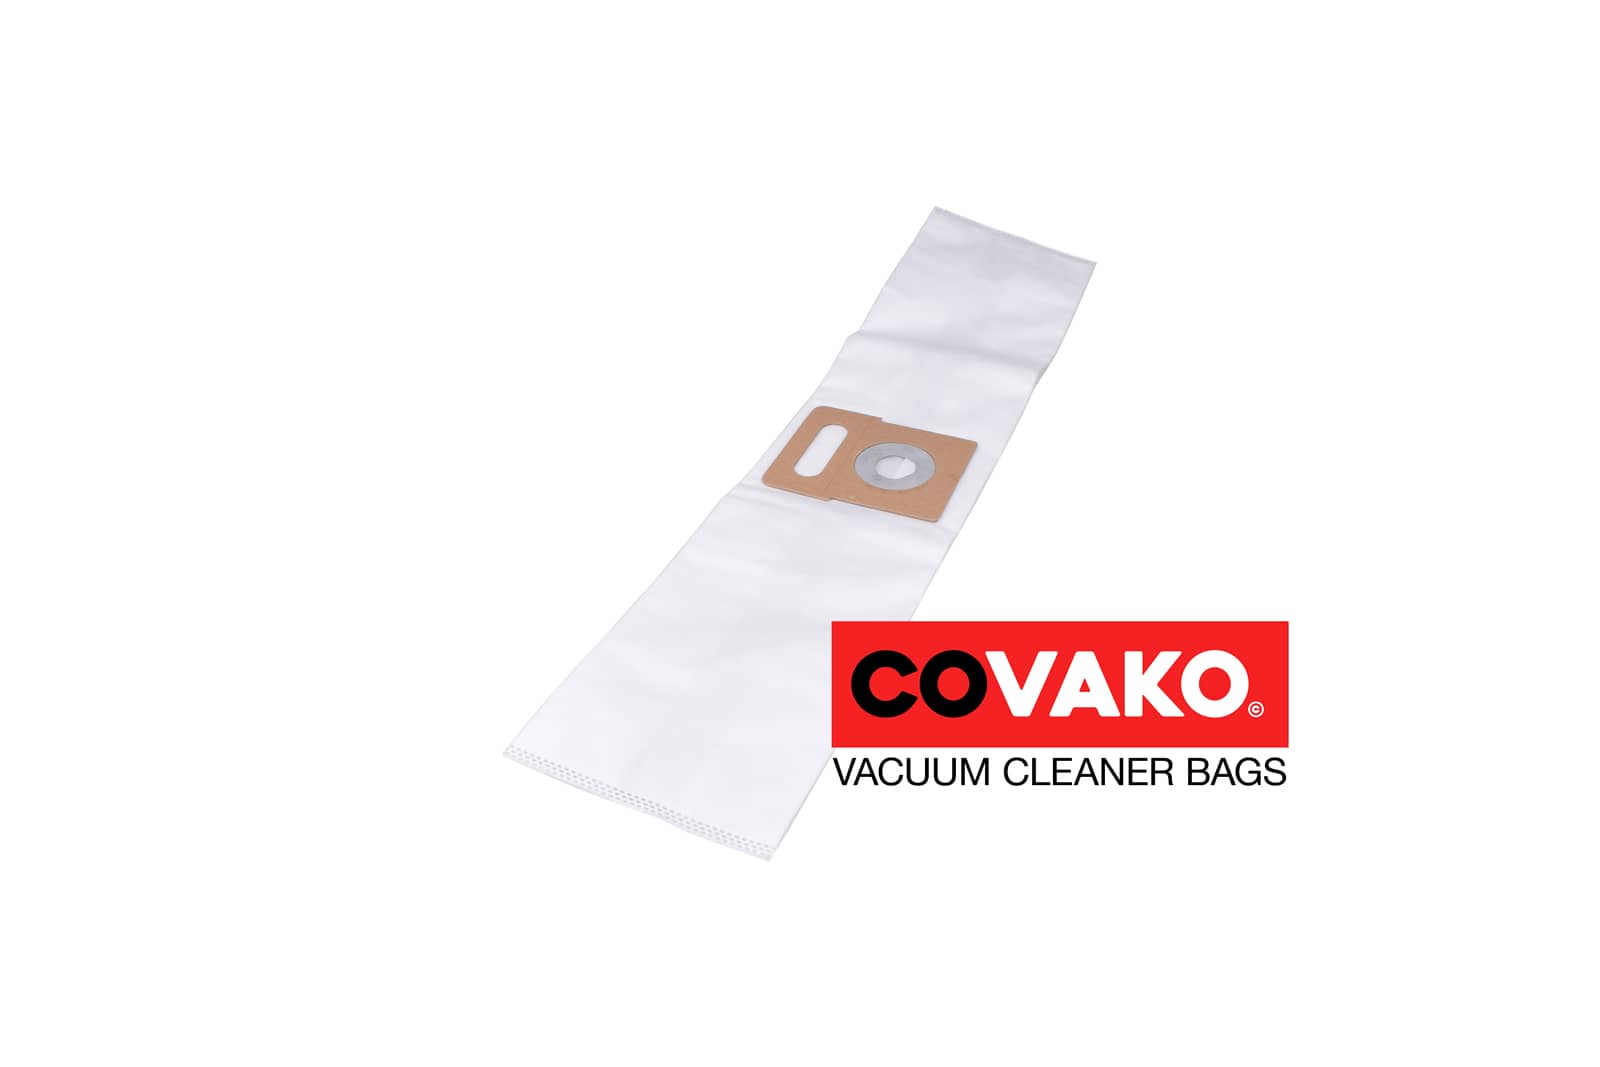 Fast Profi / Synthesis - Fast vacuum cleaner bags